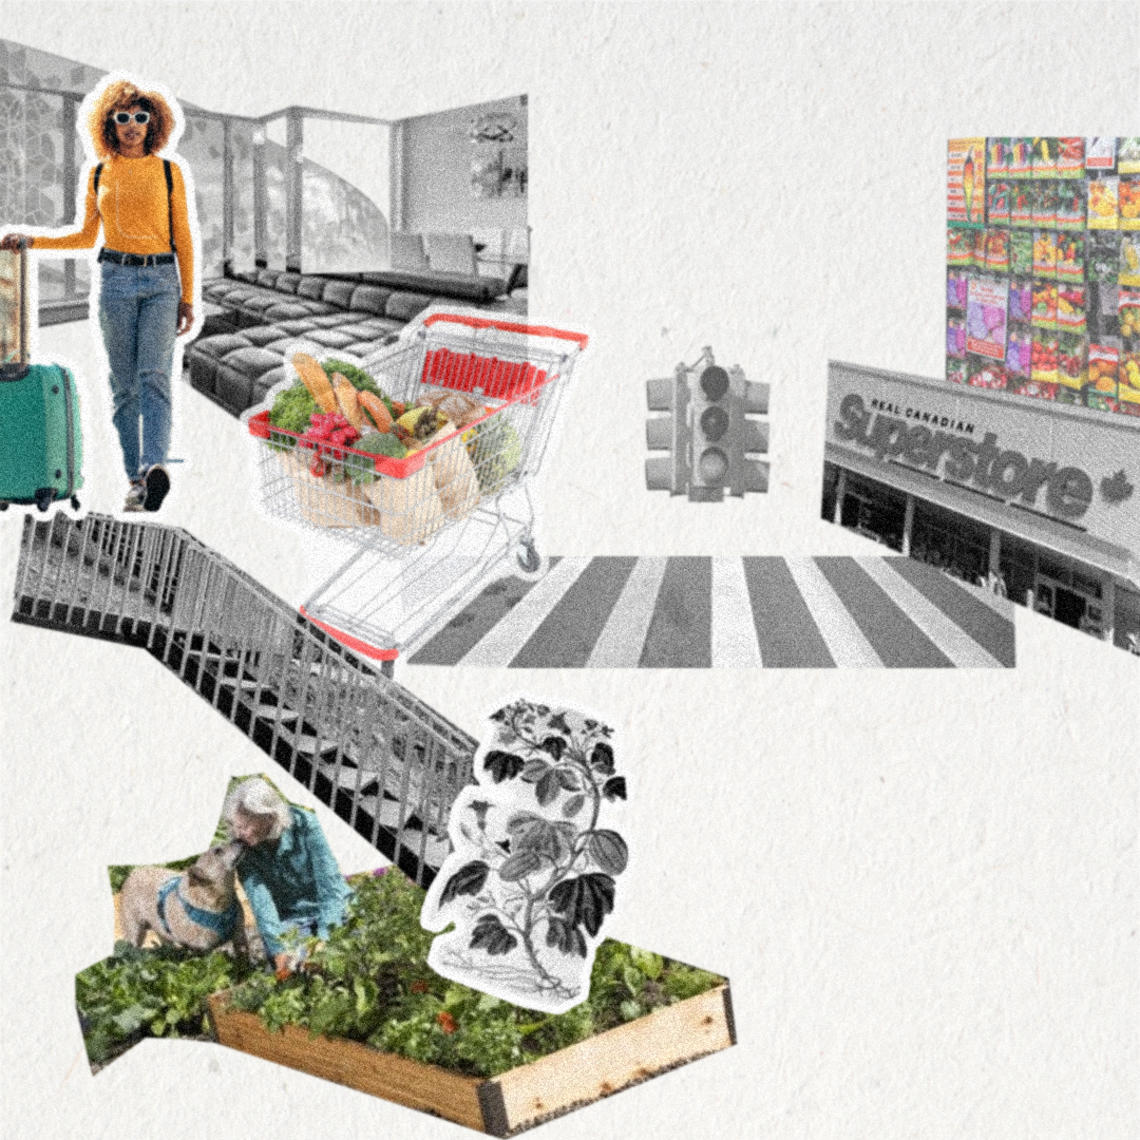 Digital collage of urban setting with grocery store, community garden and person dressed walking with suitcase